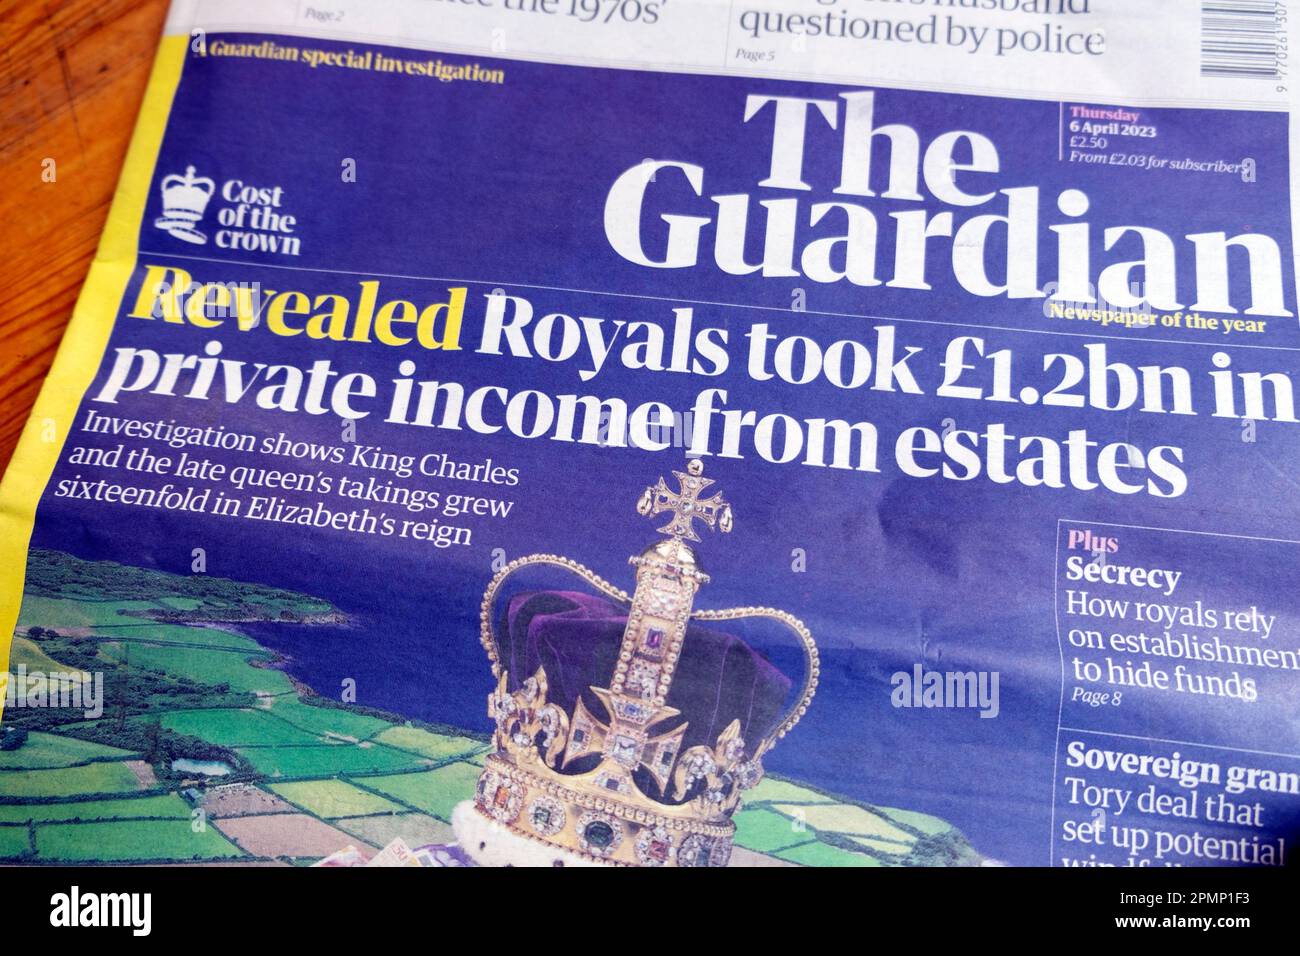 'Royals took £1.2bn in private income from estates' The Guardian newspaper headline front page British monarchy article on 6 April 2023 London UK Stock Photo